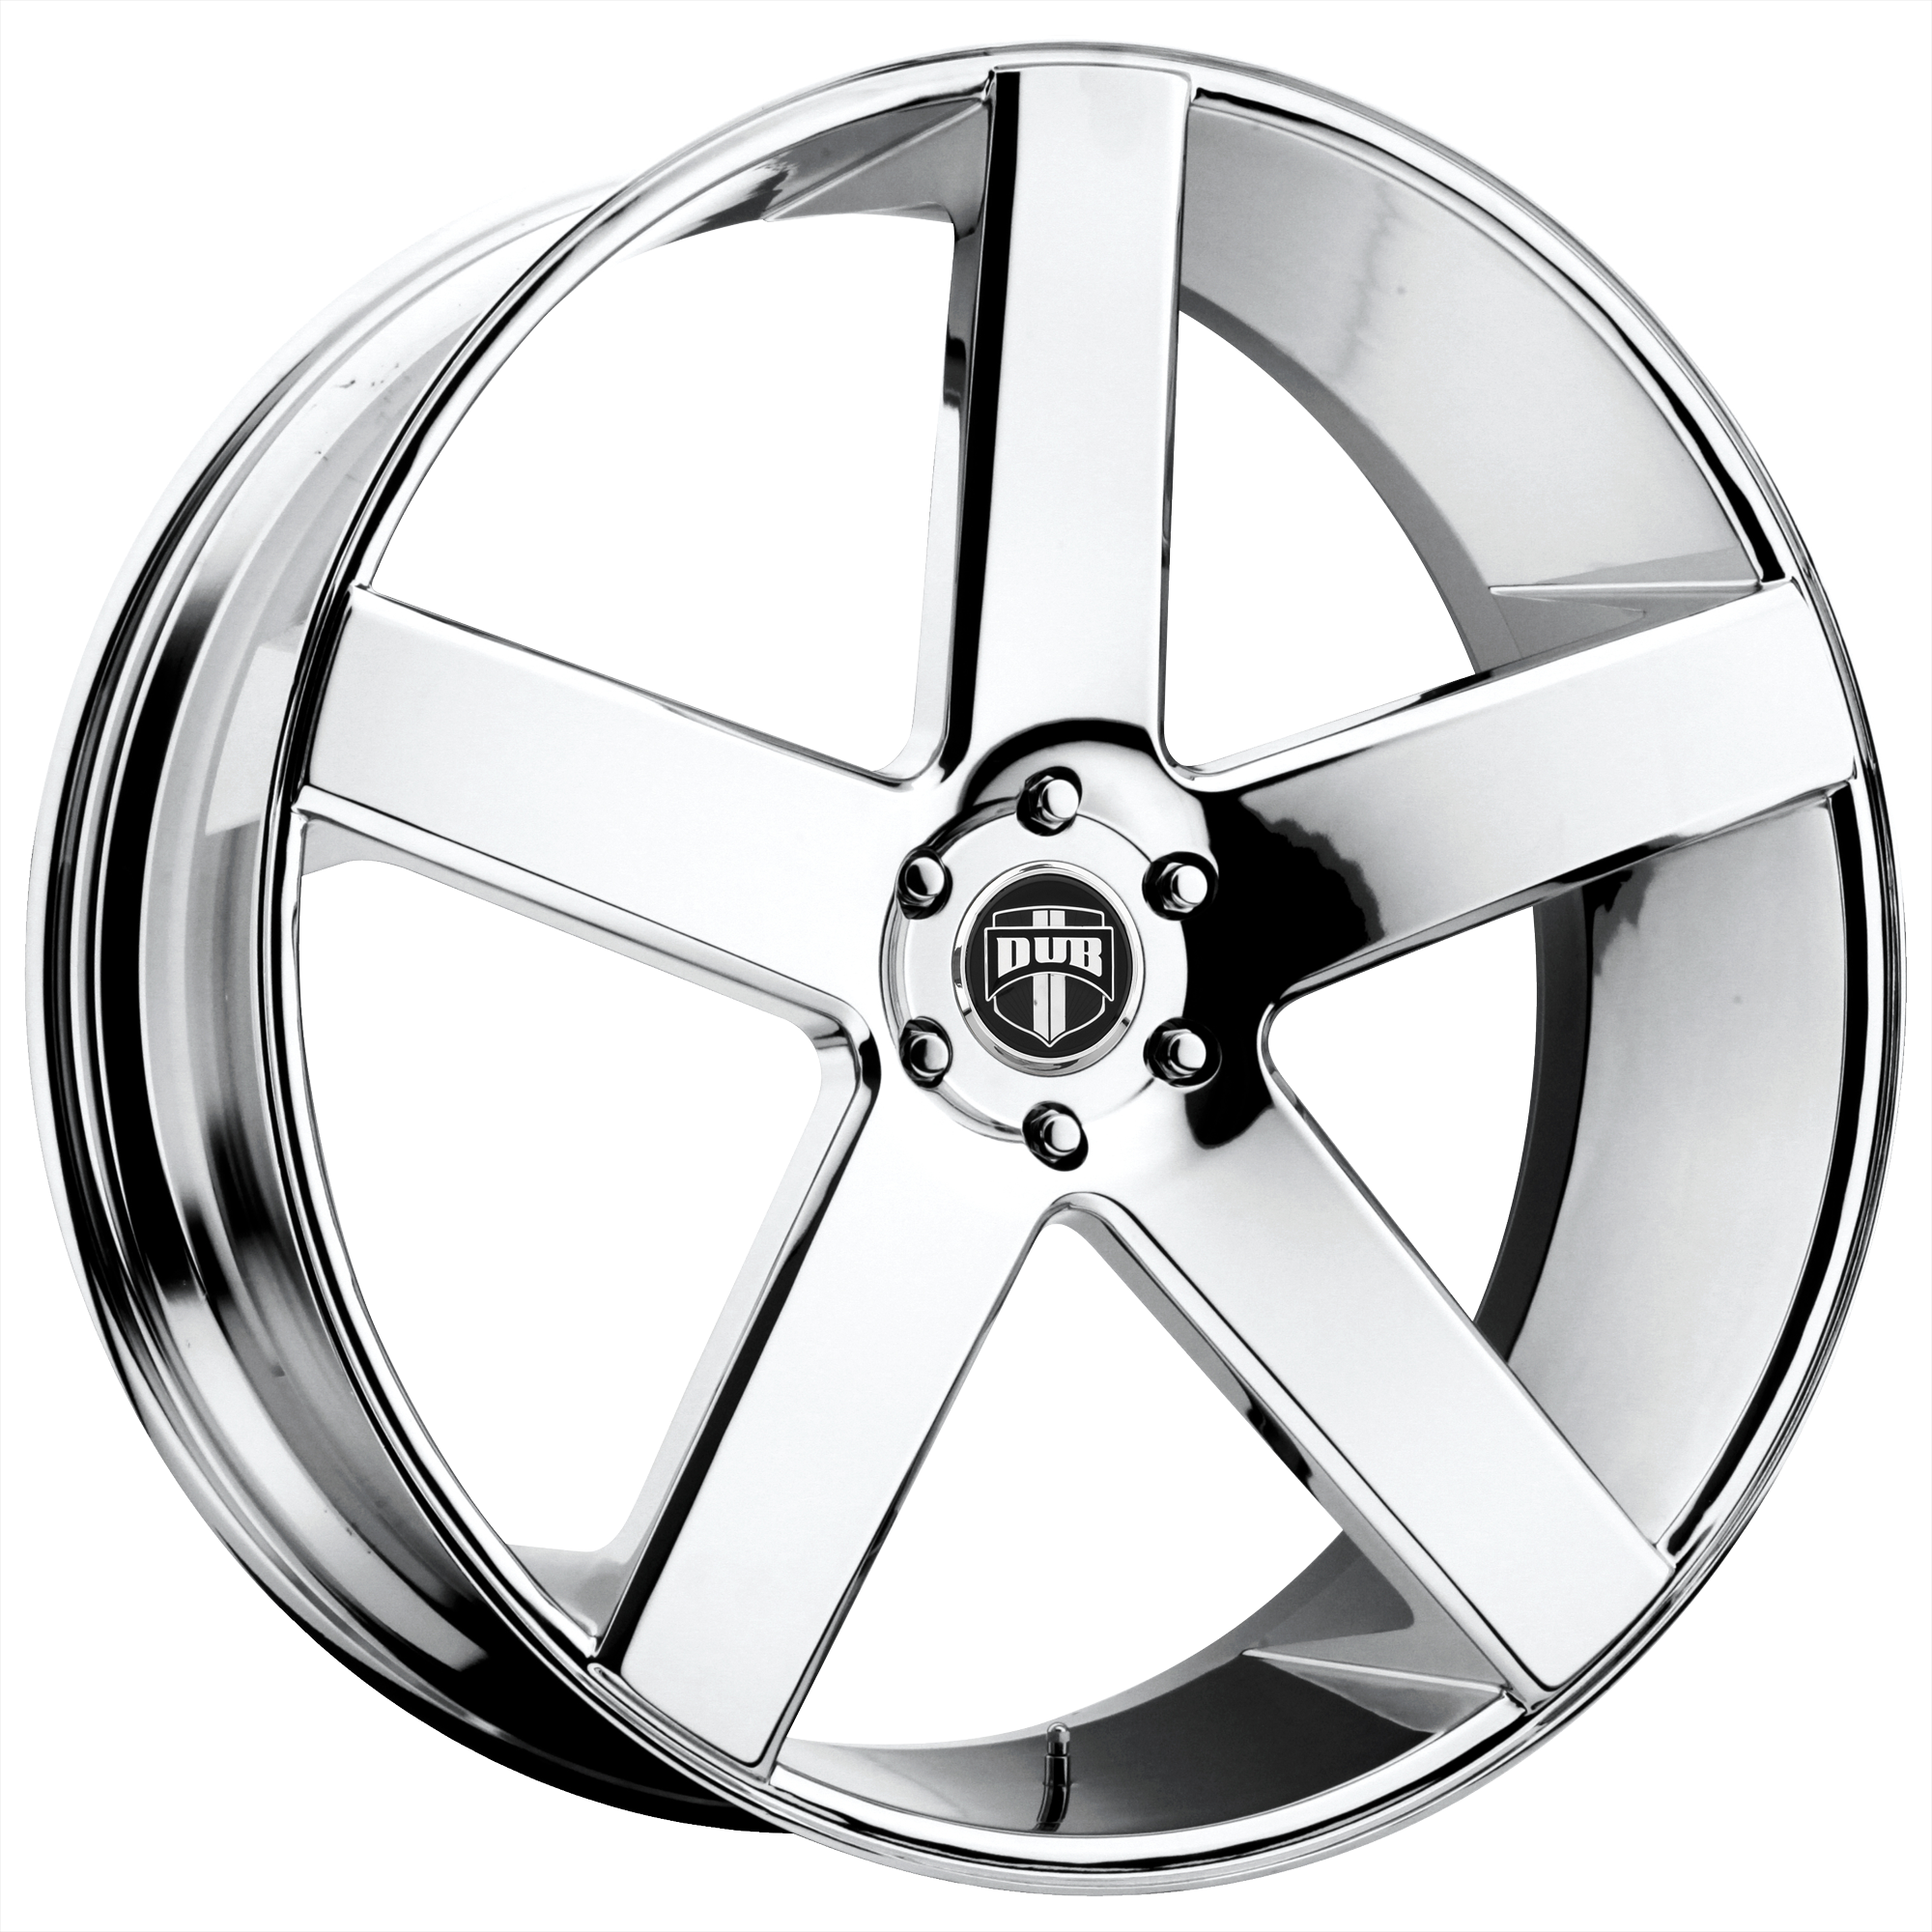 BALLER 22x9.5 5x115.00 CHROME PLATED (13 mm) - Tires and Engine Performance